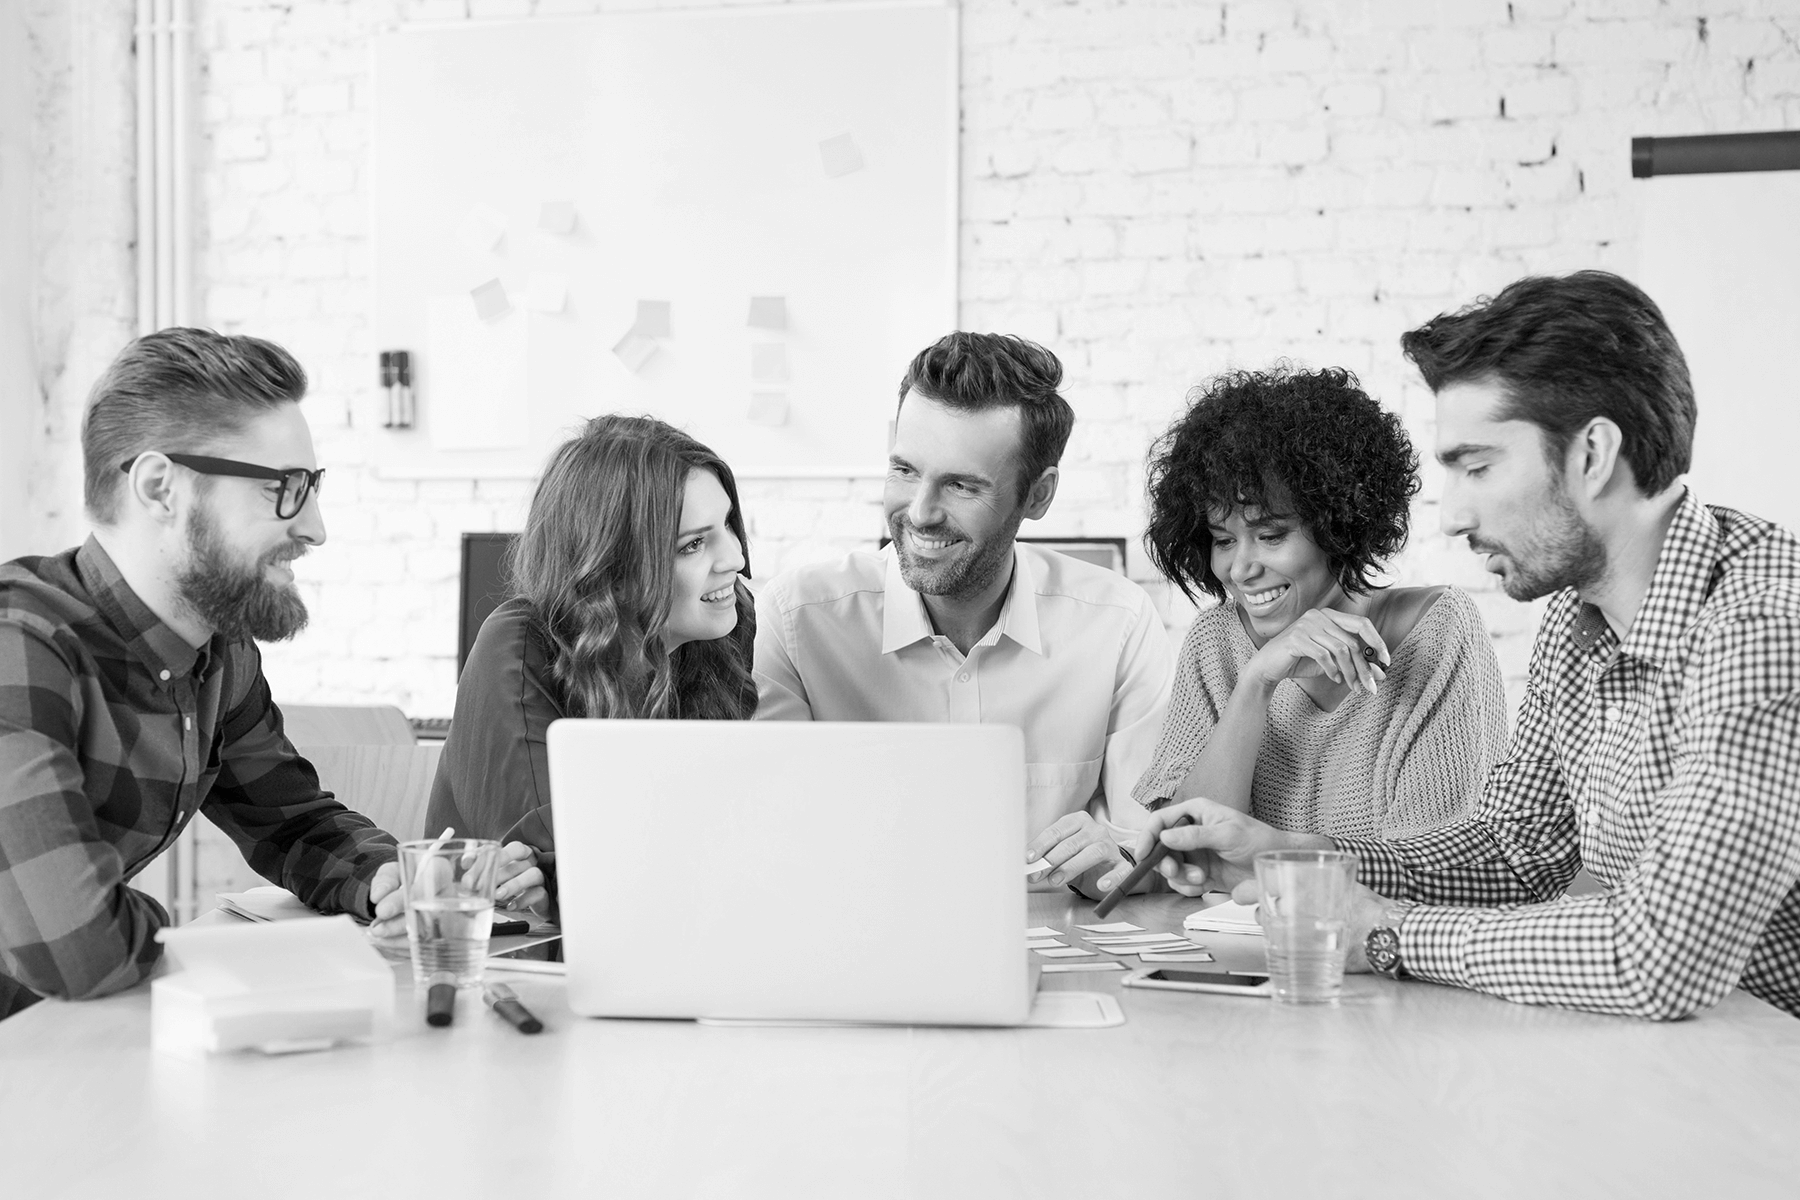 Faded background of five culturally diverse adults smiling and conversing around a laptop at their workplace